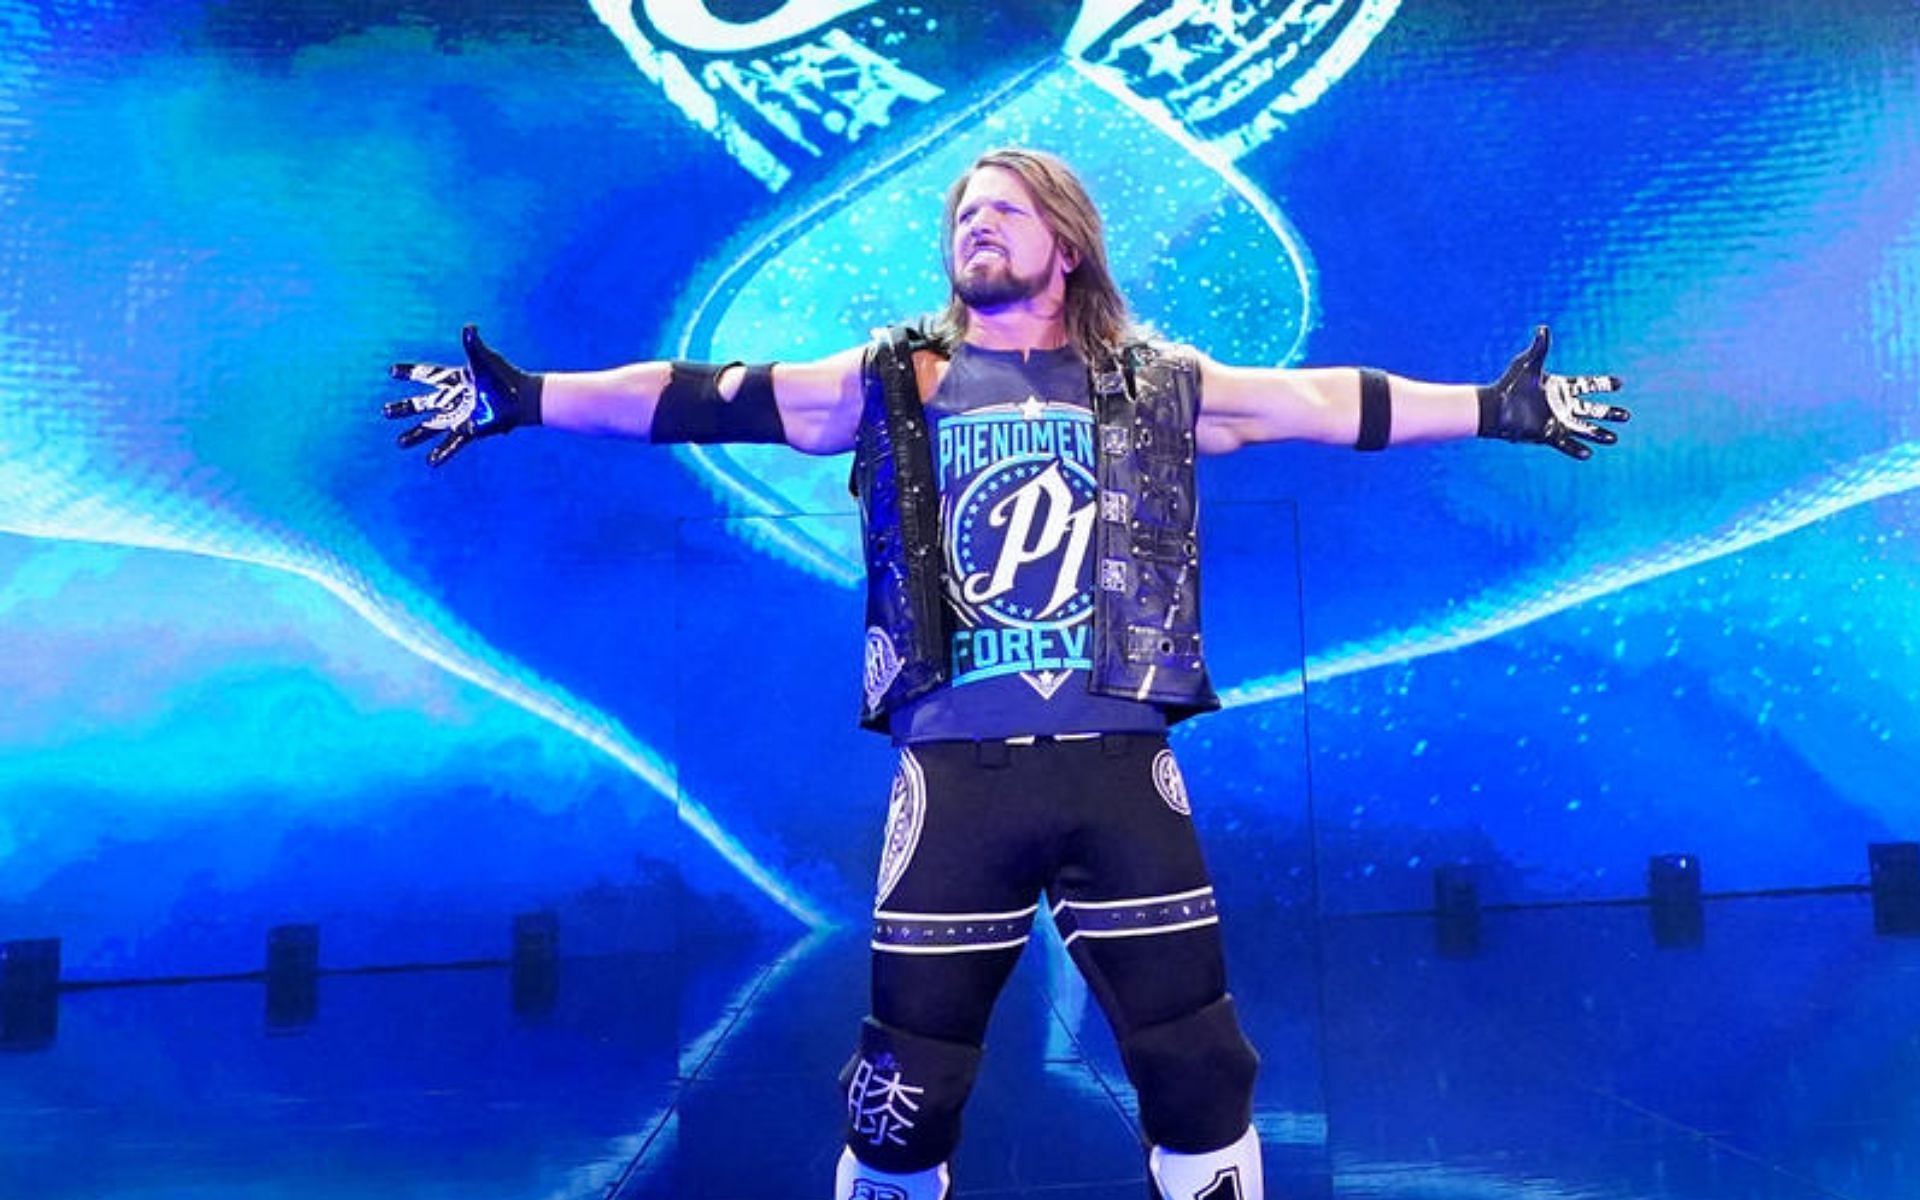 AJ Styles during his entrance on RAW!